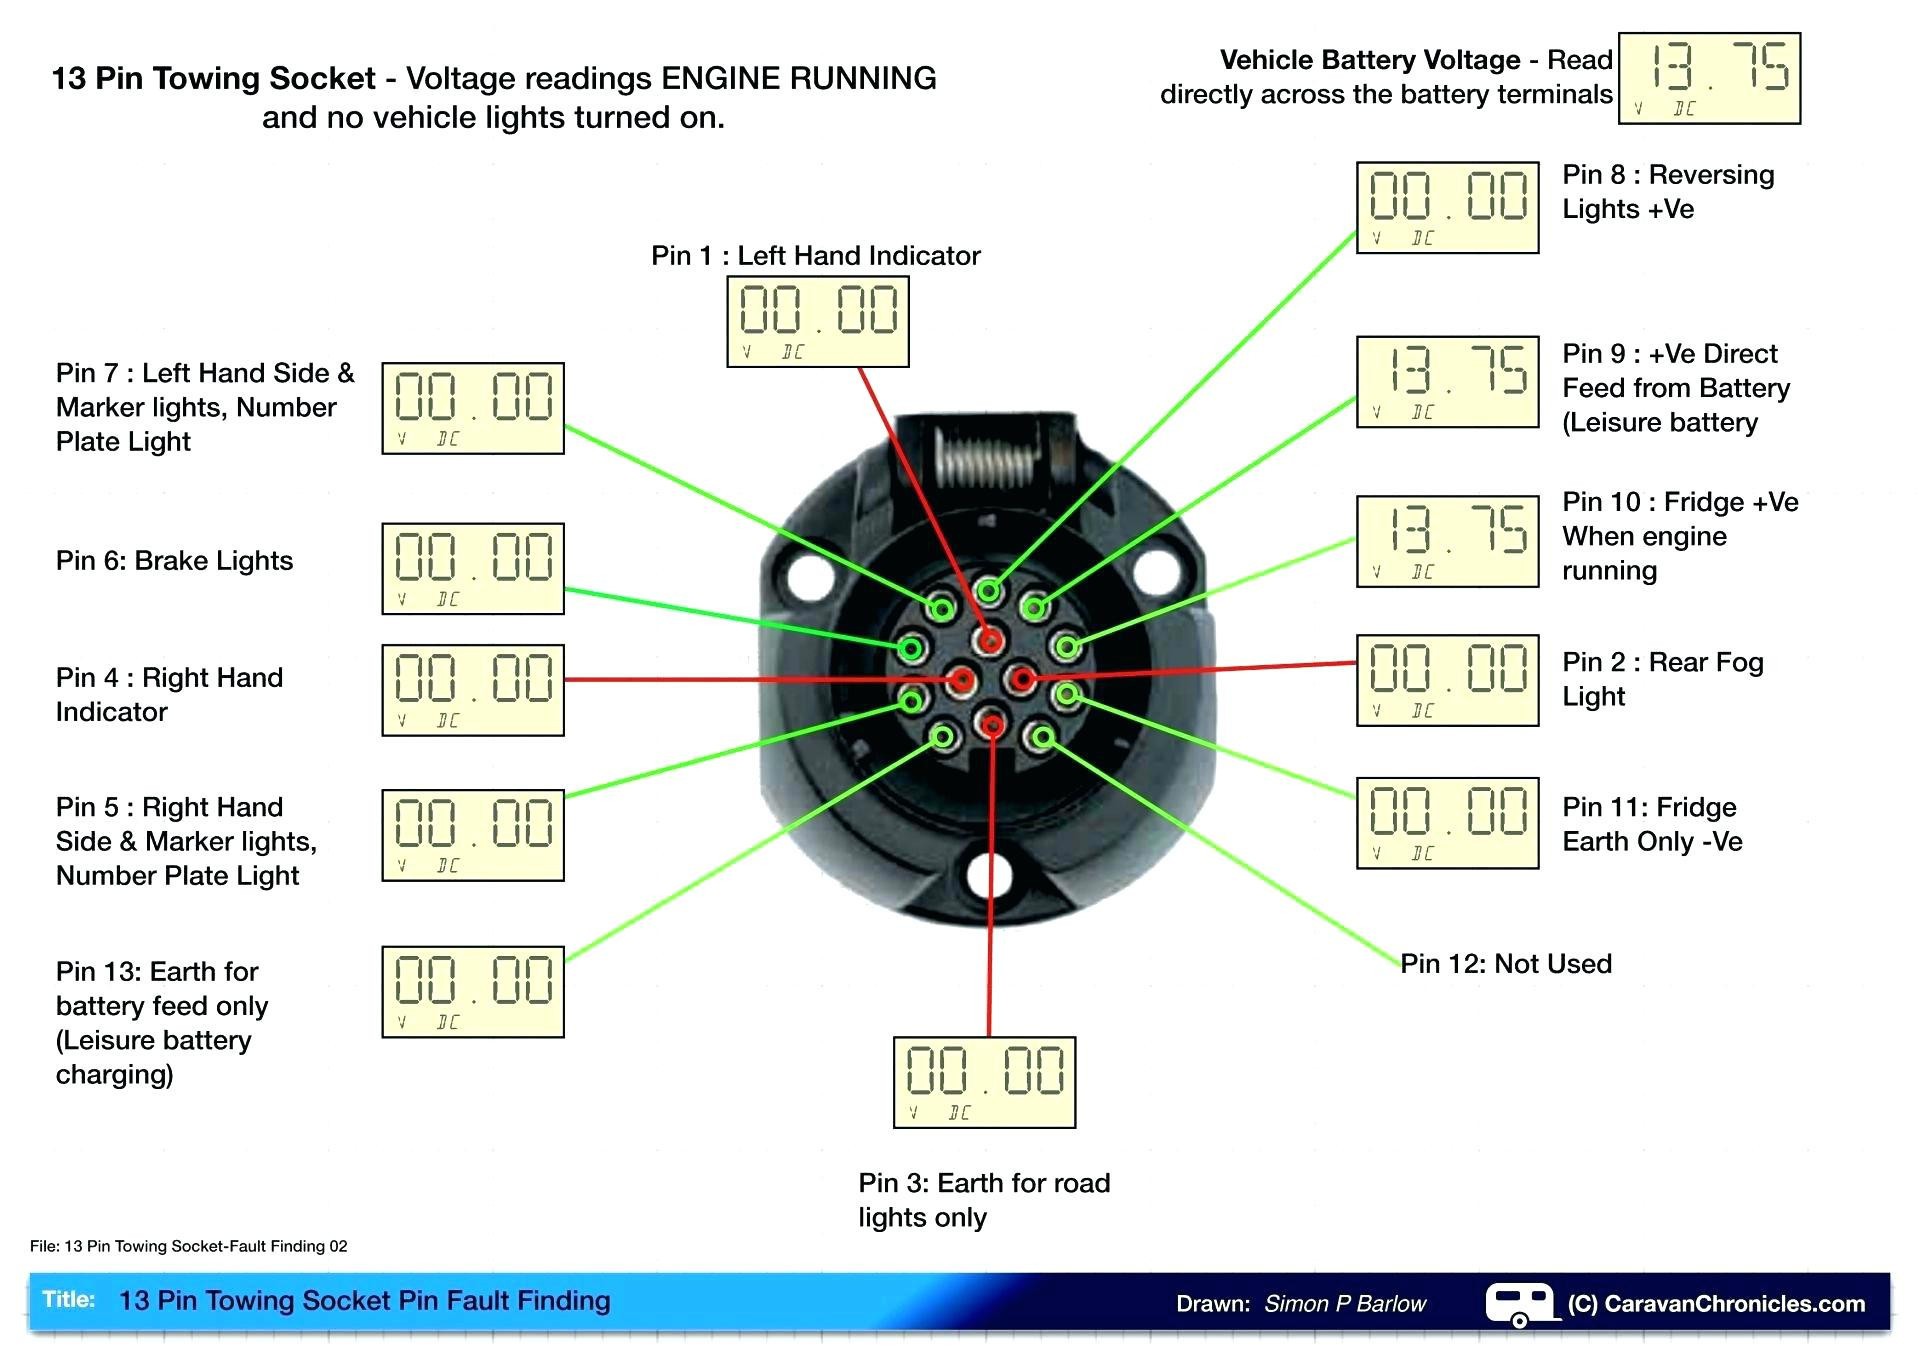 Wiring Diagram for A Trailer socket New 7 Pin Round Wiring Diagram Afif